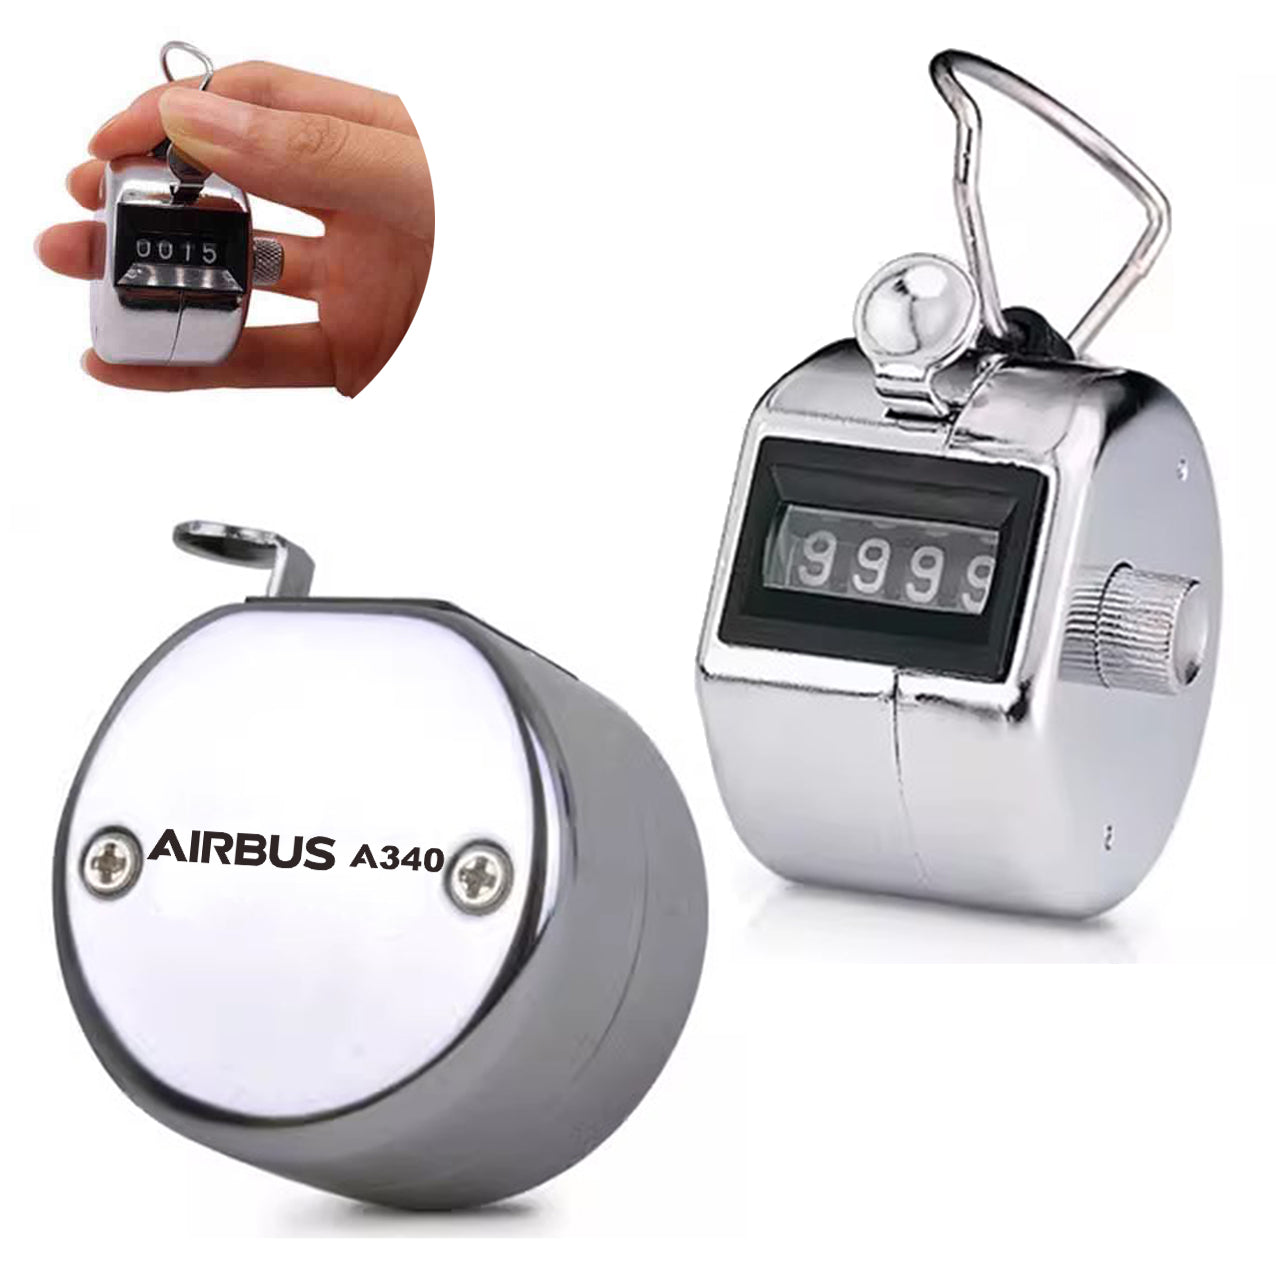 The Airbus A340 Designed Metal Handheld Counters